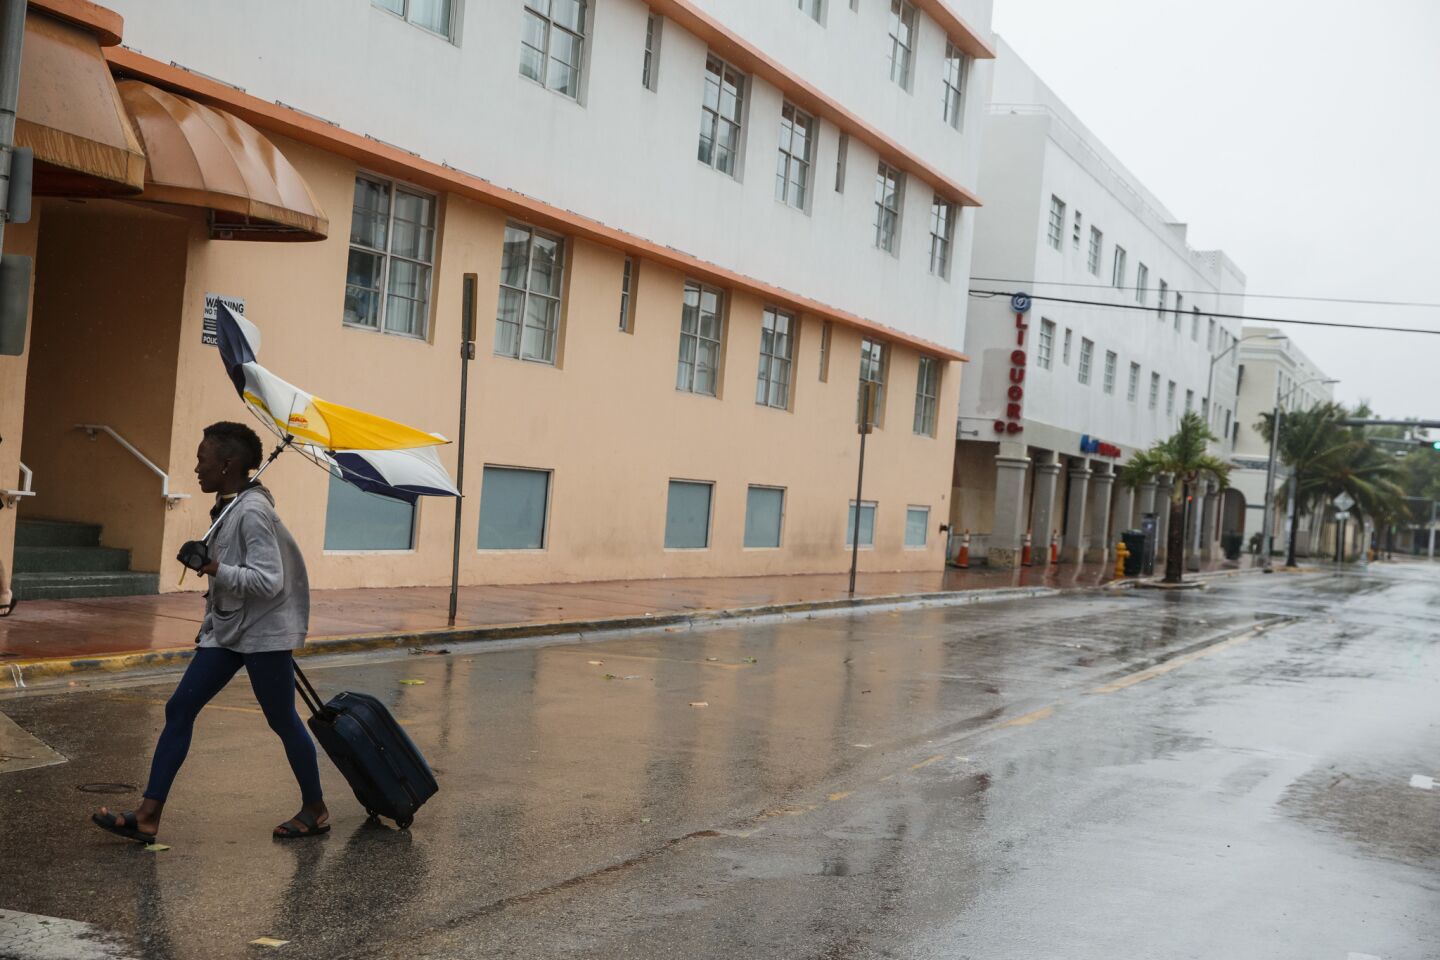 Abby Jenkins walks against the wind with her luggage and umbrella to get to safety, in Miami Beach.